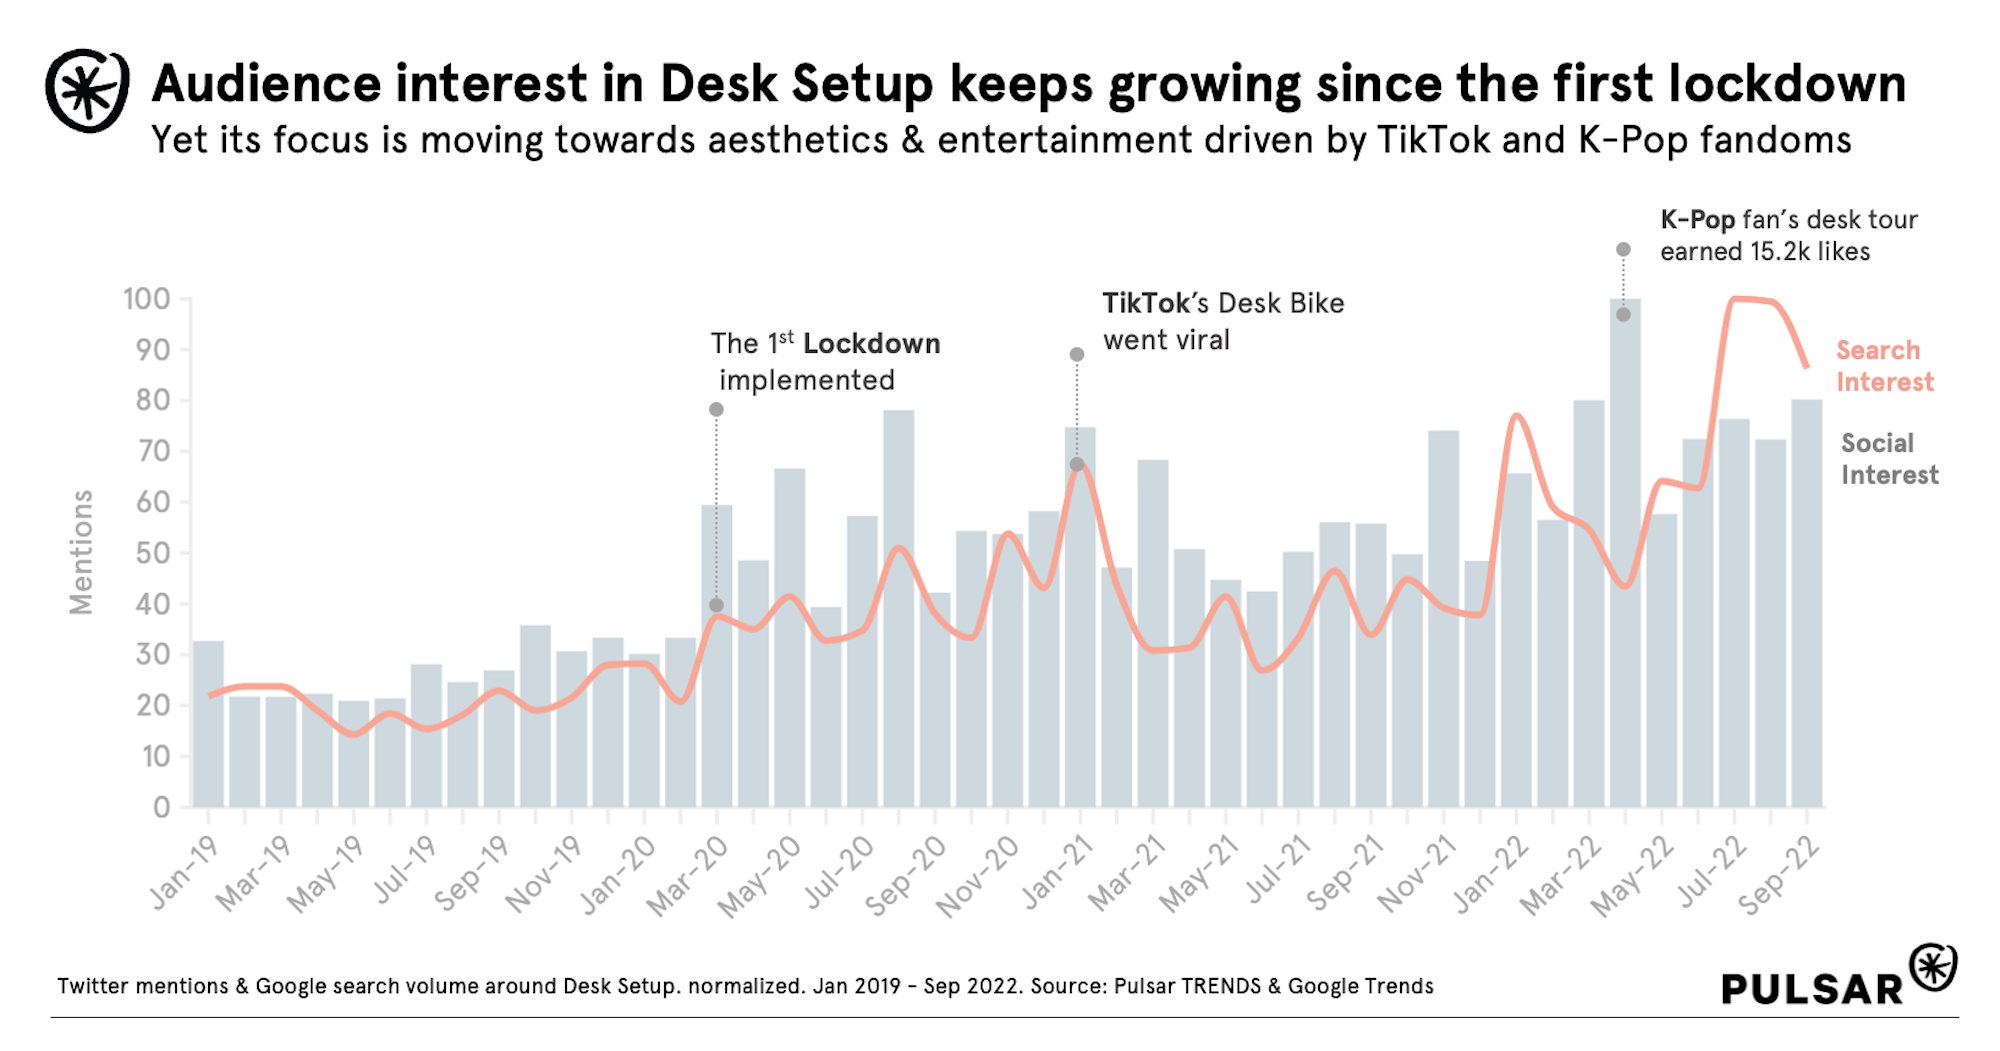 Audience interest in Desk Setup keeps growing since the first lockdown